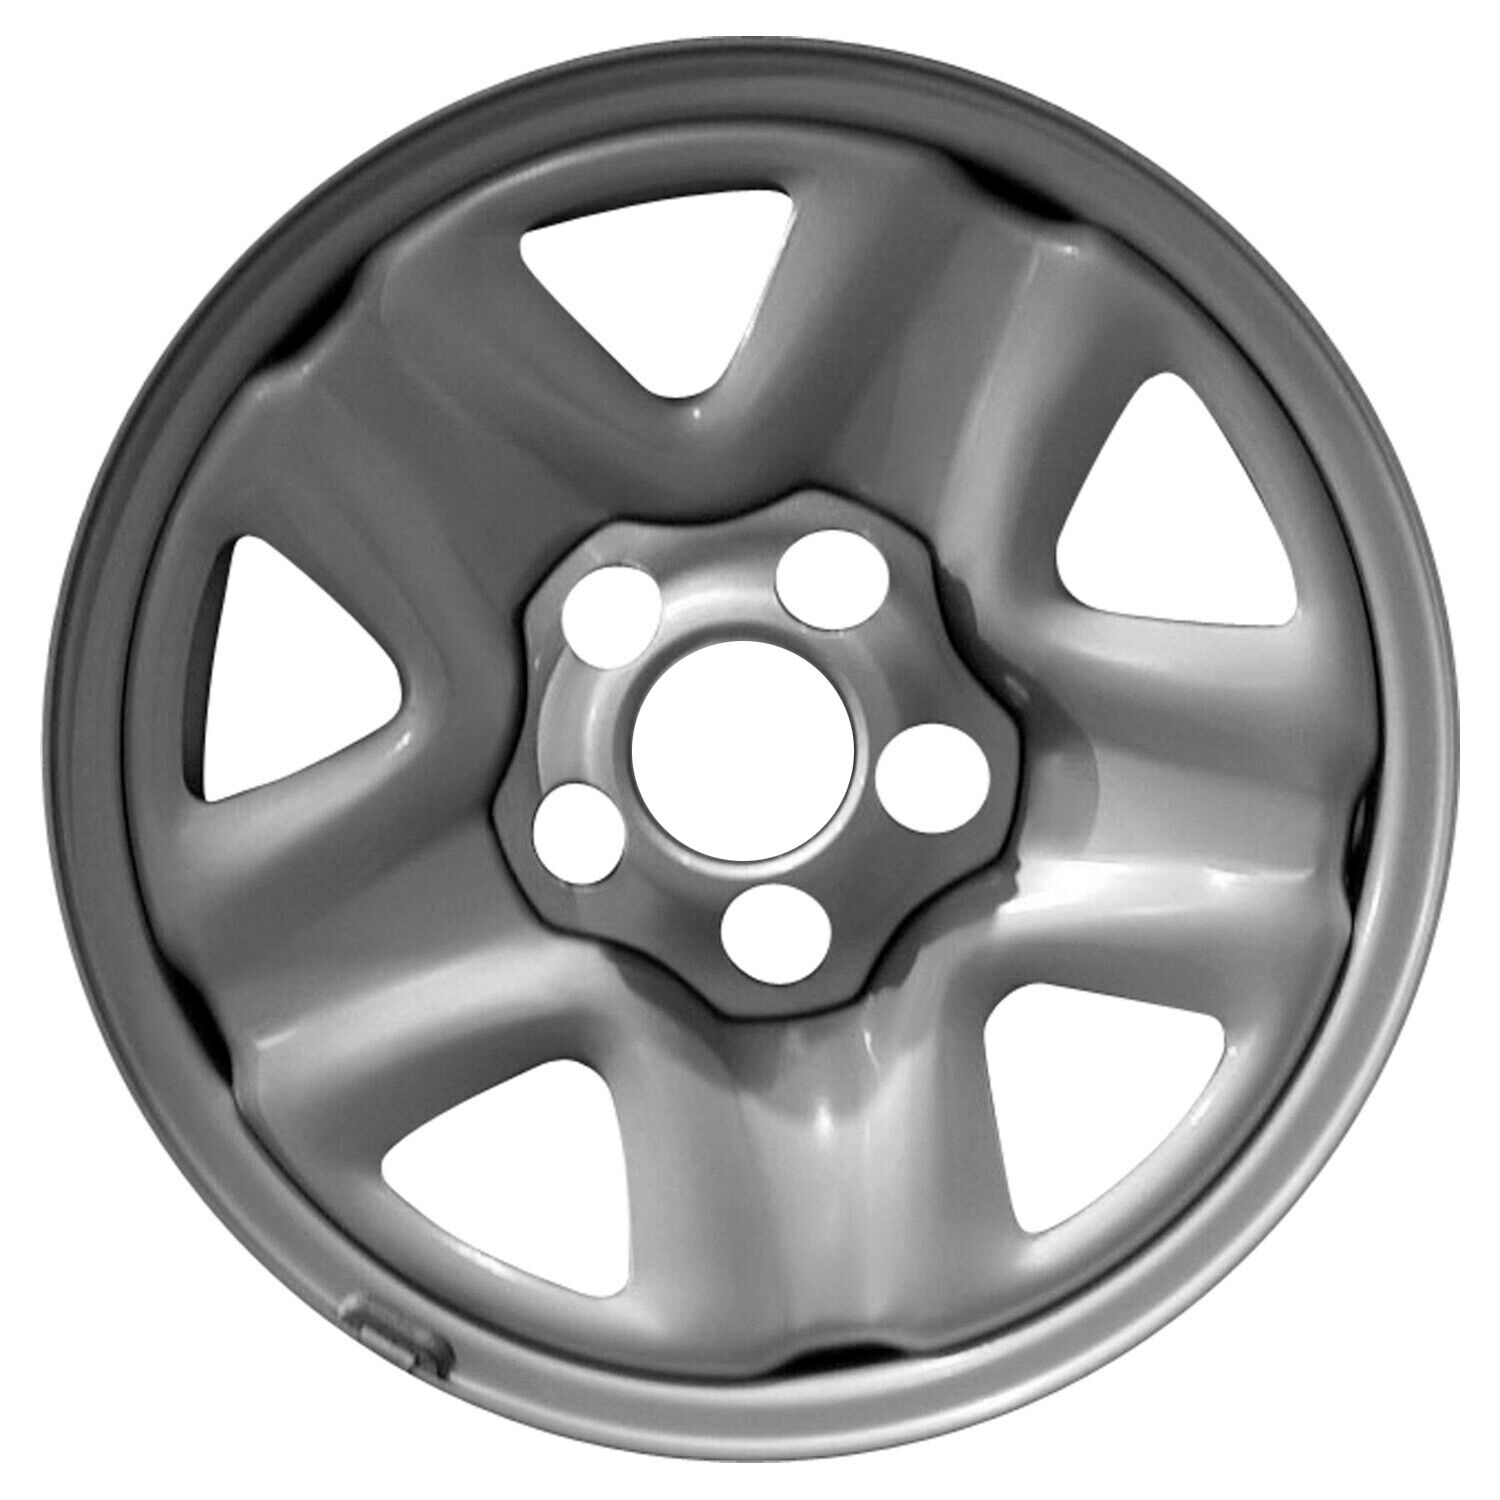 Refurbished 15x6 Painted Silver Wheel fits 2001-2004 Toyota Tacoma Pickup 2Wd